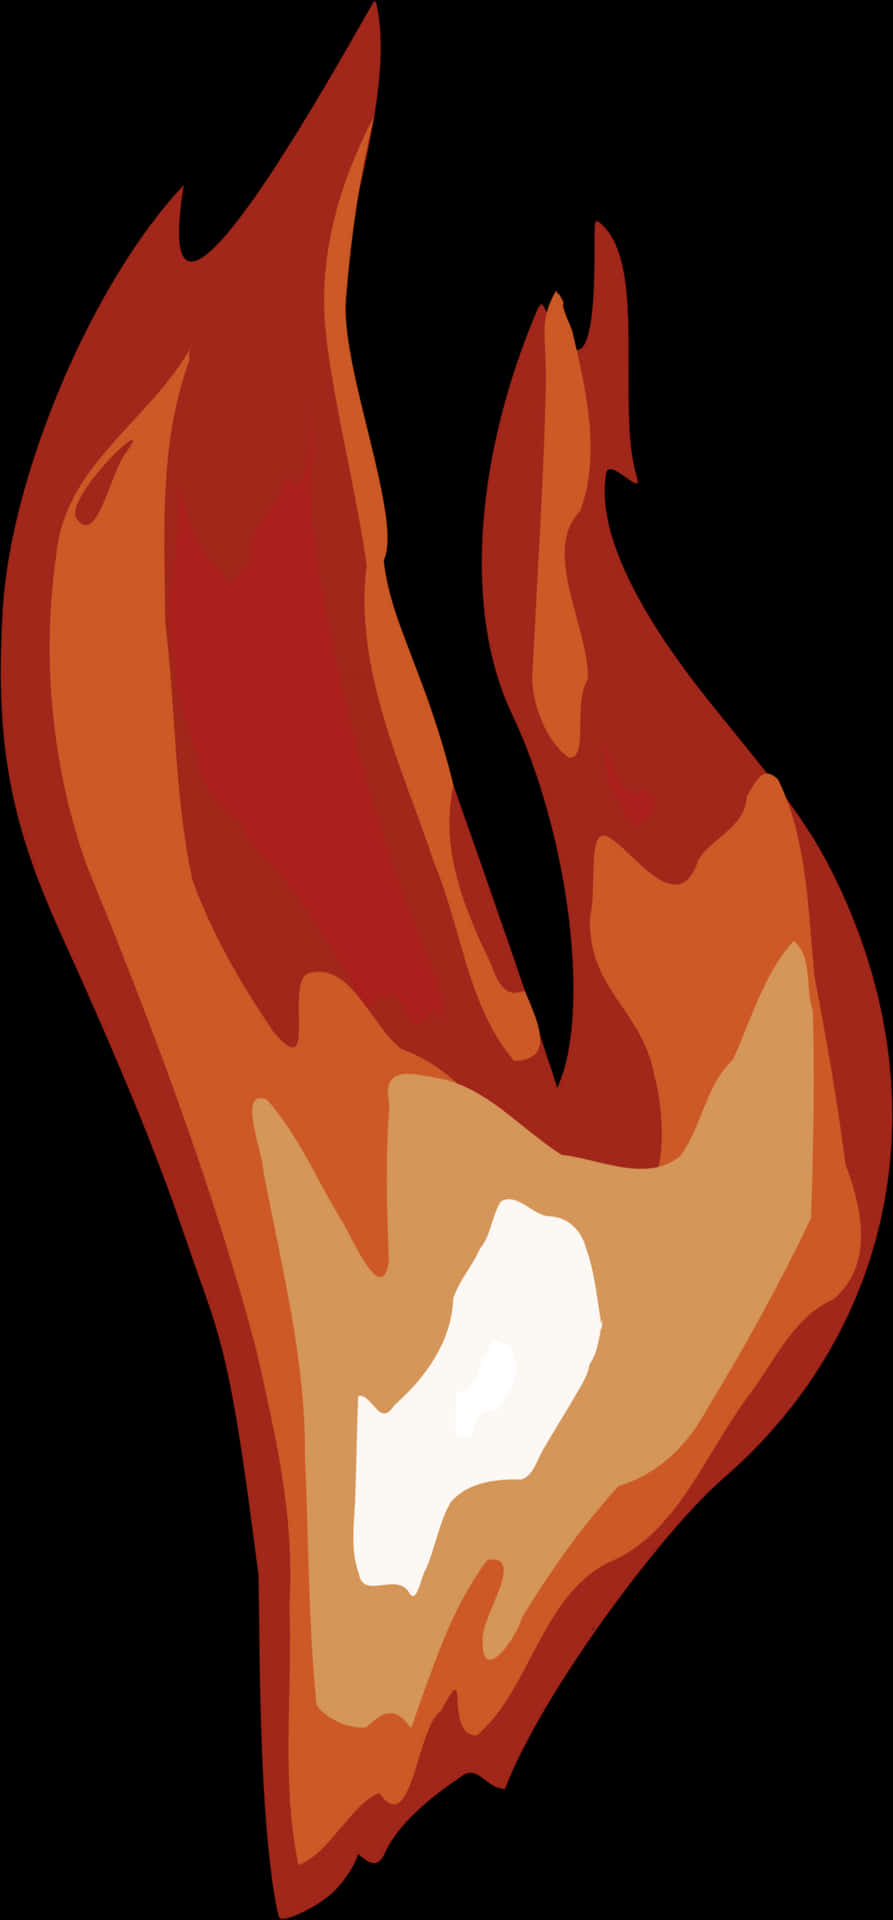 Abstract Flame Illustration PNG